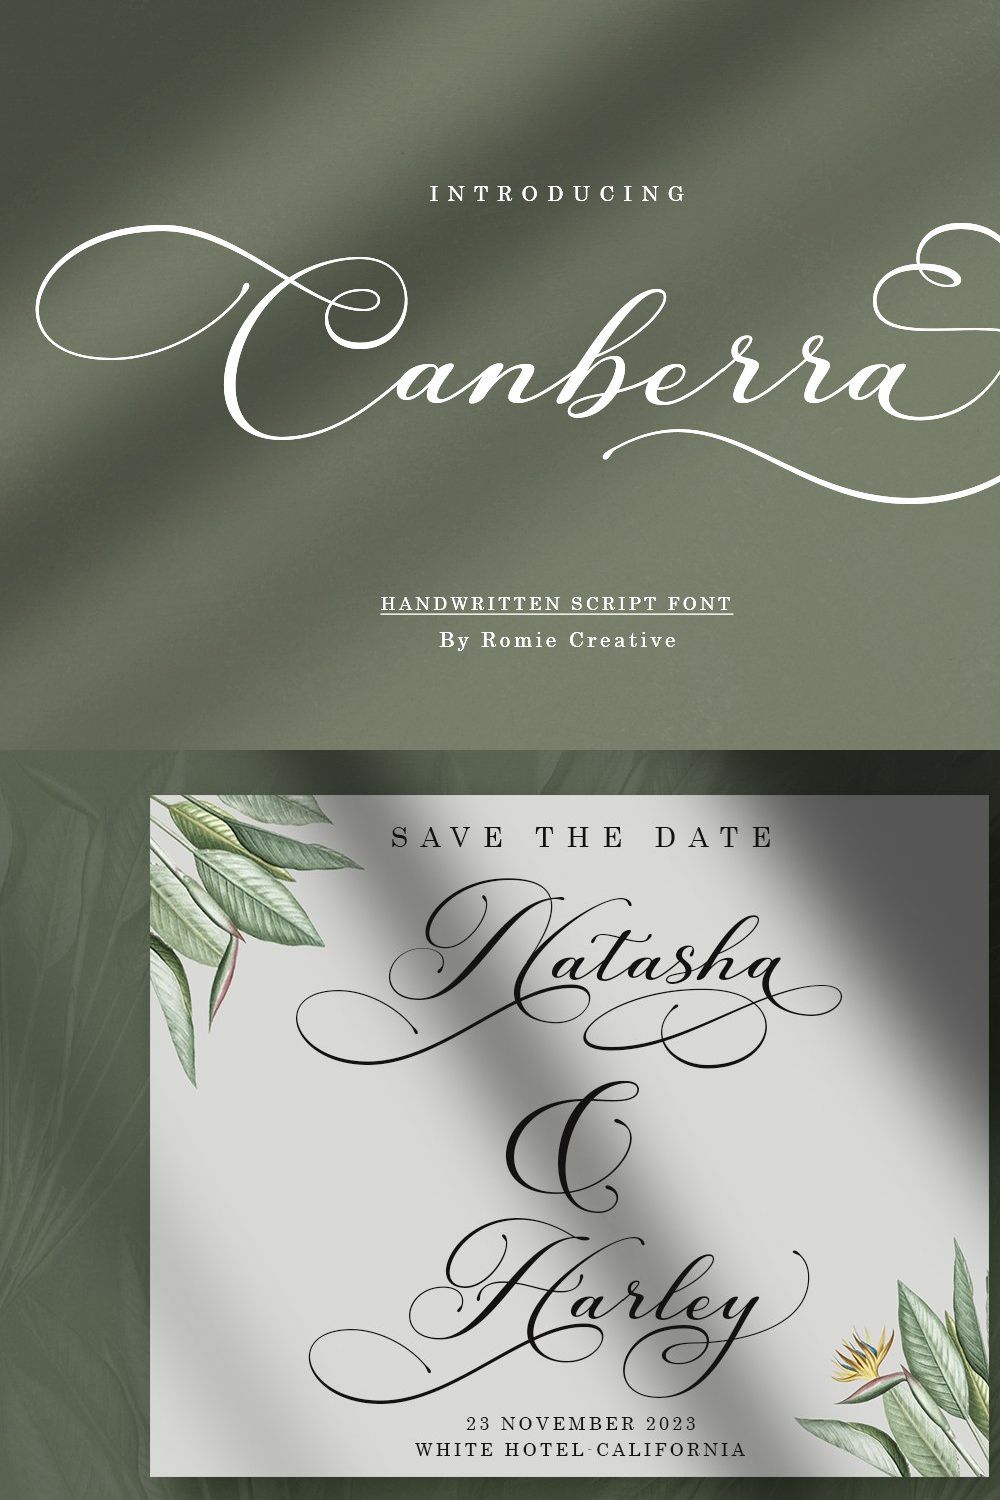 Canberra pinterest preview image.